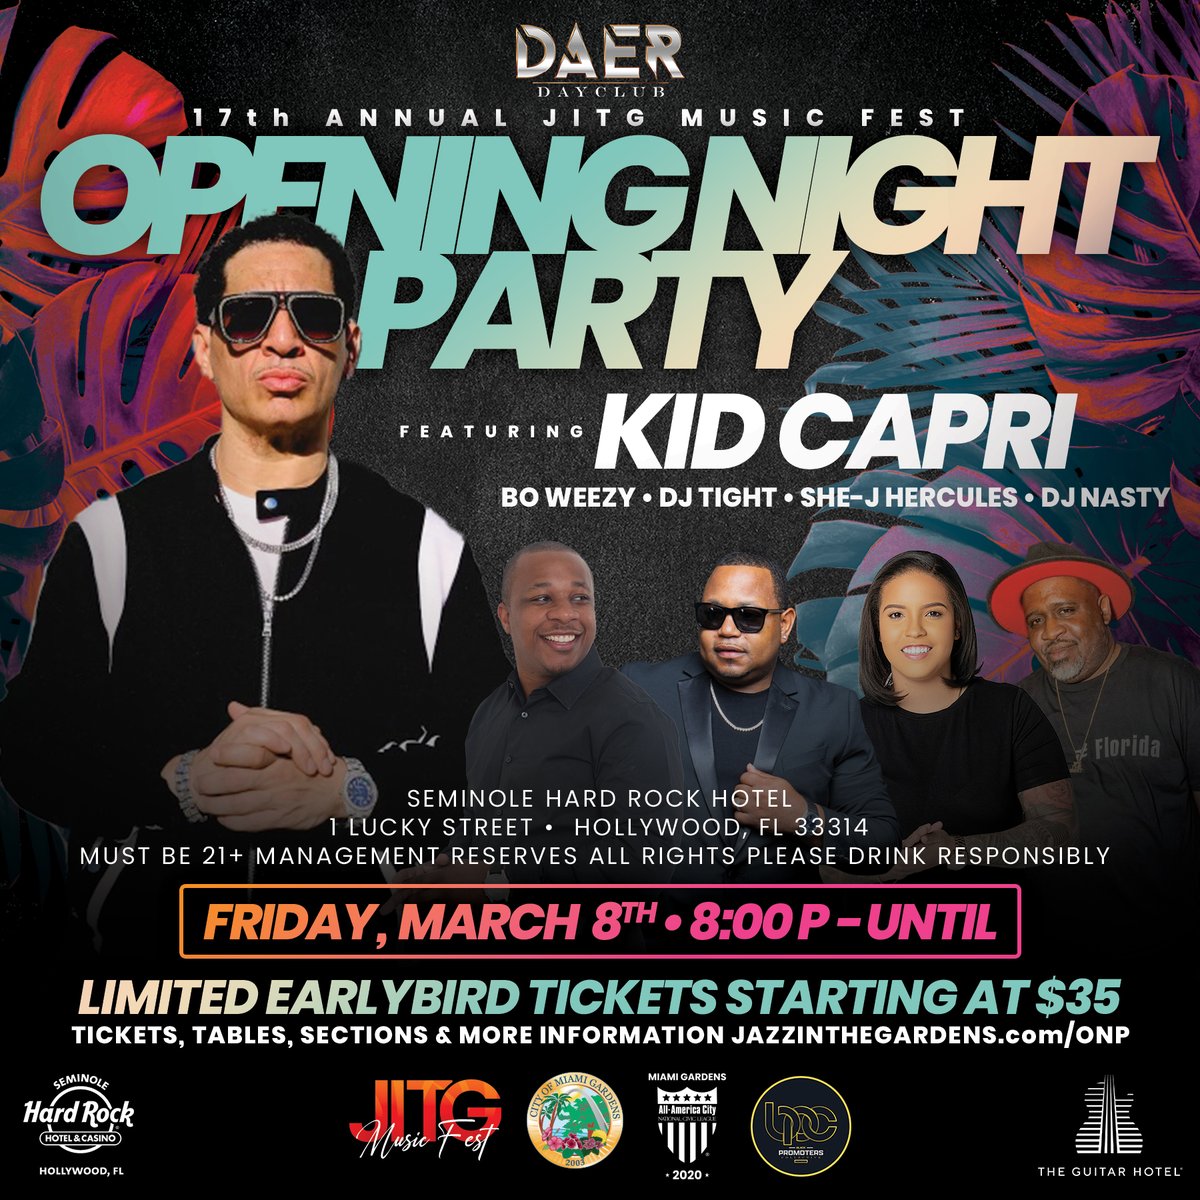 🎉 Start #JITG2024 at the Opening Night Party at Daer Nightclub! 🔥 Kid Capri & Miami Gardens' top DJs are ready to turn it up! 🎧✨ Don't miss the ultimate kickoff. Get your tickets & join the celebration! 🎟️ #JITG #JITGMusicFest #DaerNightclub